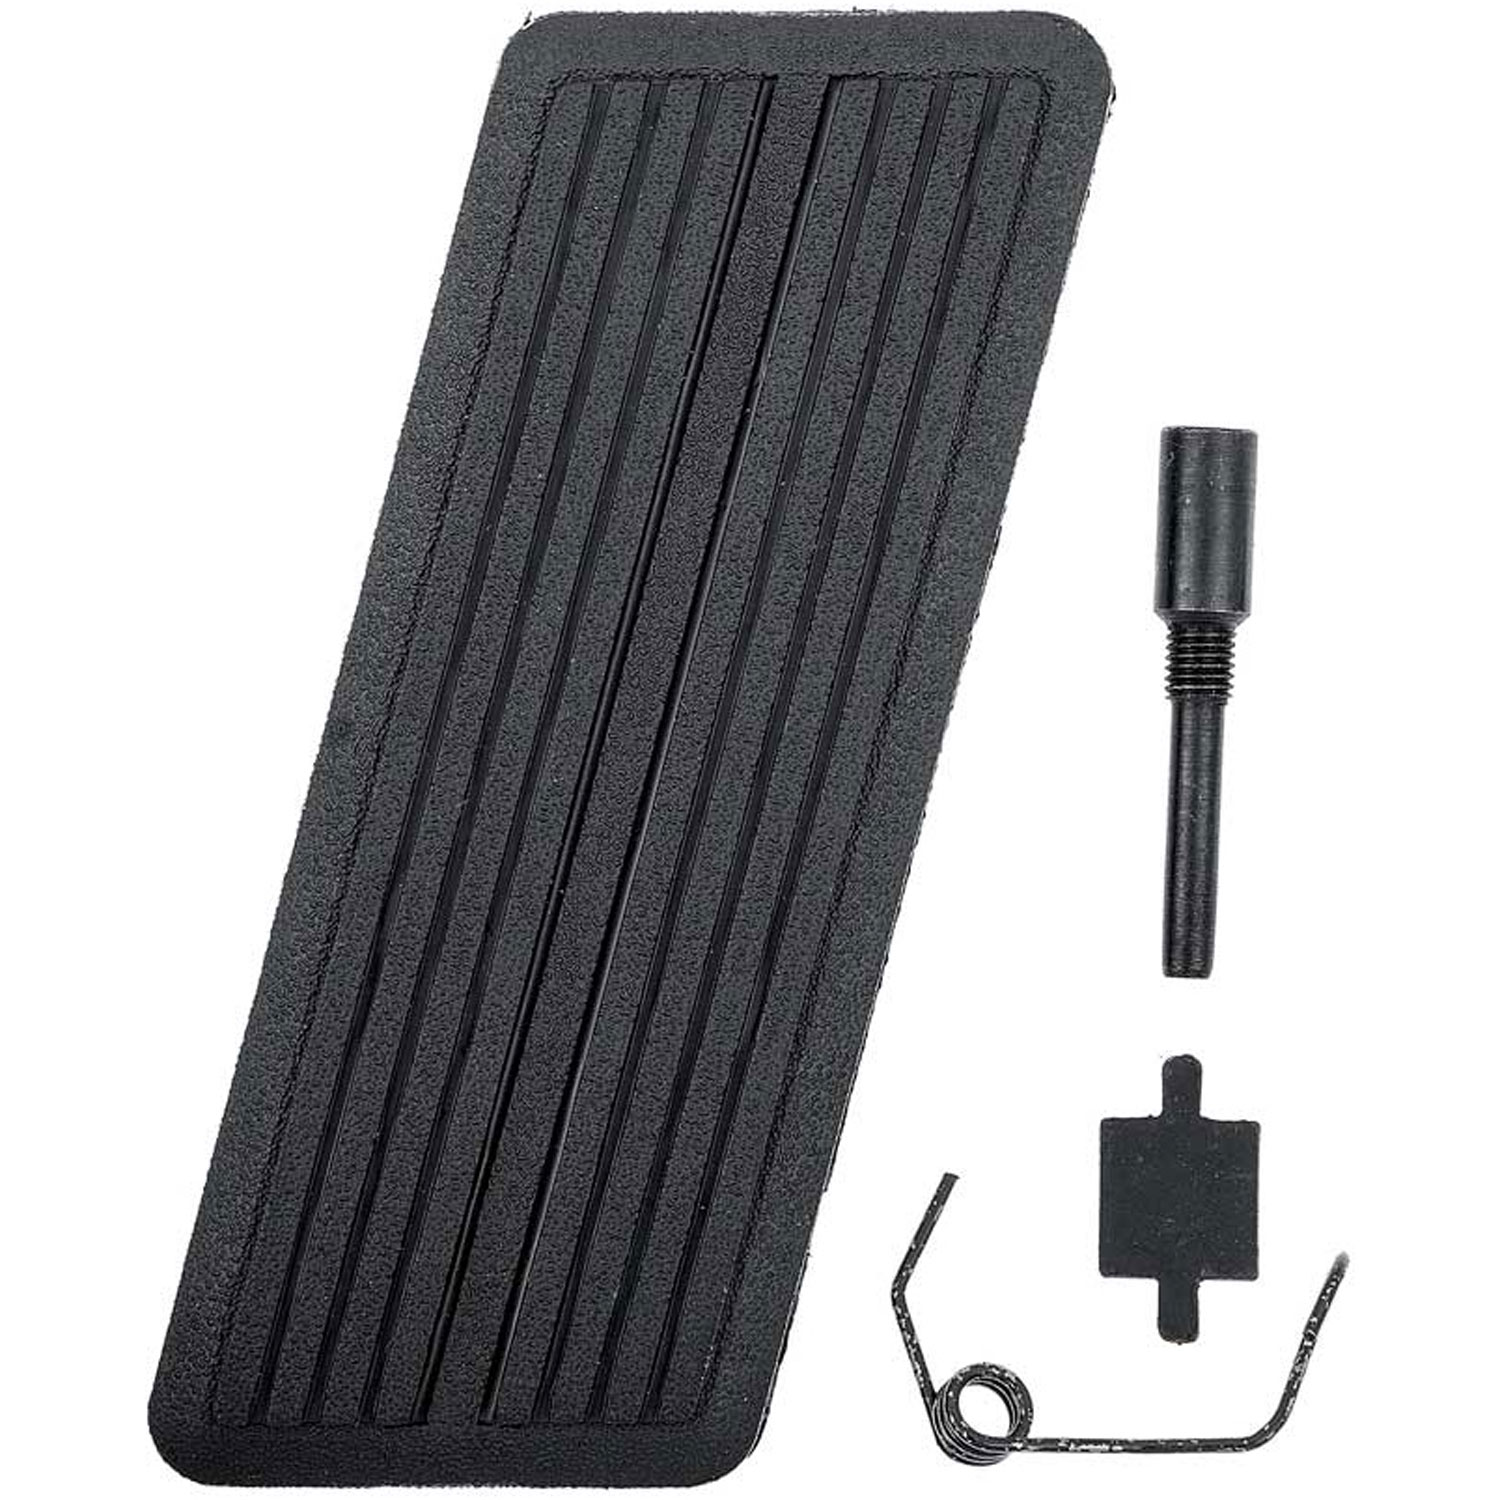 Accelerator Pedal Pad With Hardware 1973-1974 Mopar B/C/E-Body Includes Pedal Pad, Spring & Pin